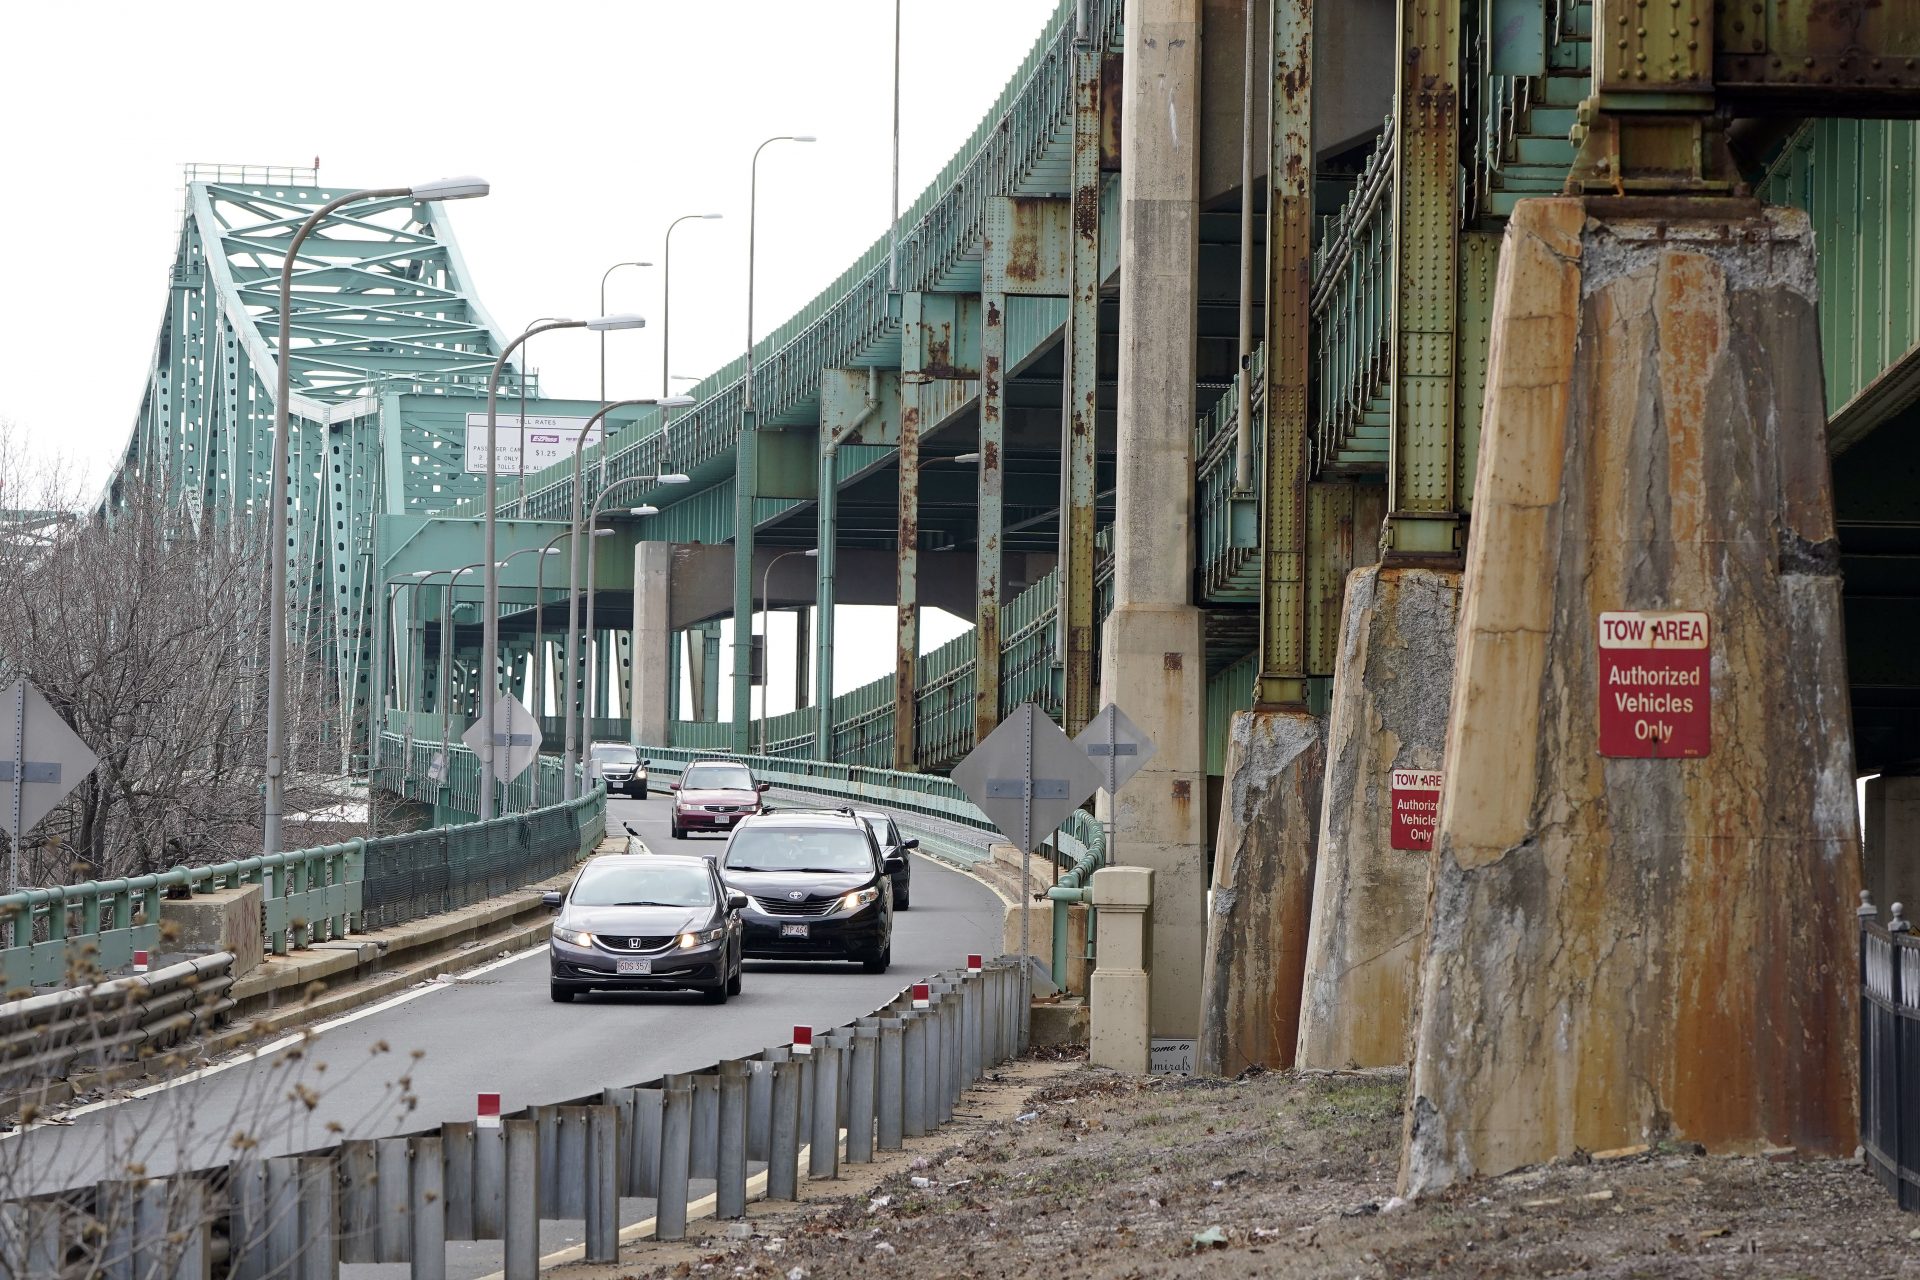 Drivers take an exit ramp off the Tobin Memorial Bridge, Wednesday, March 31, 2021, in Chelsea, Mass. President Joe Biden wants $2 trillion to reengineer America's infrastructure and expects the nation's corporations to pay for it. The Tobin Bridge spans the Mystic River and links Boston and Chelsea.